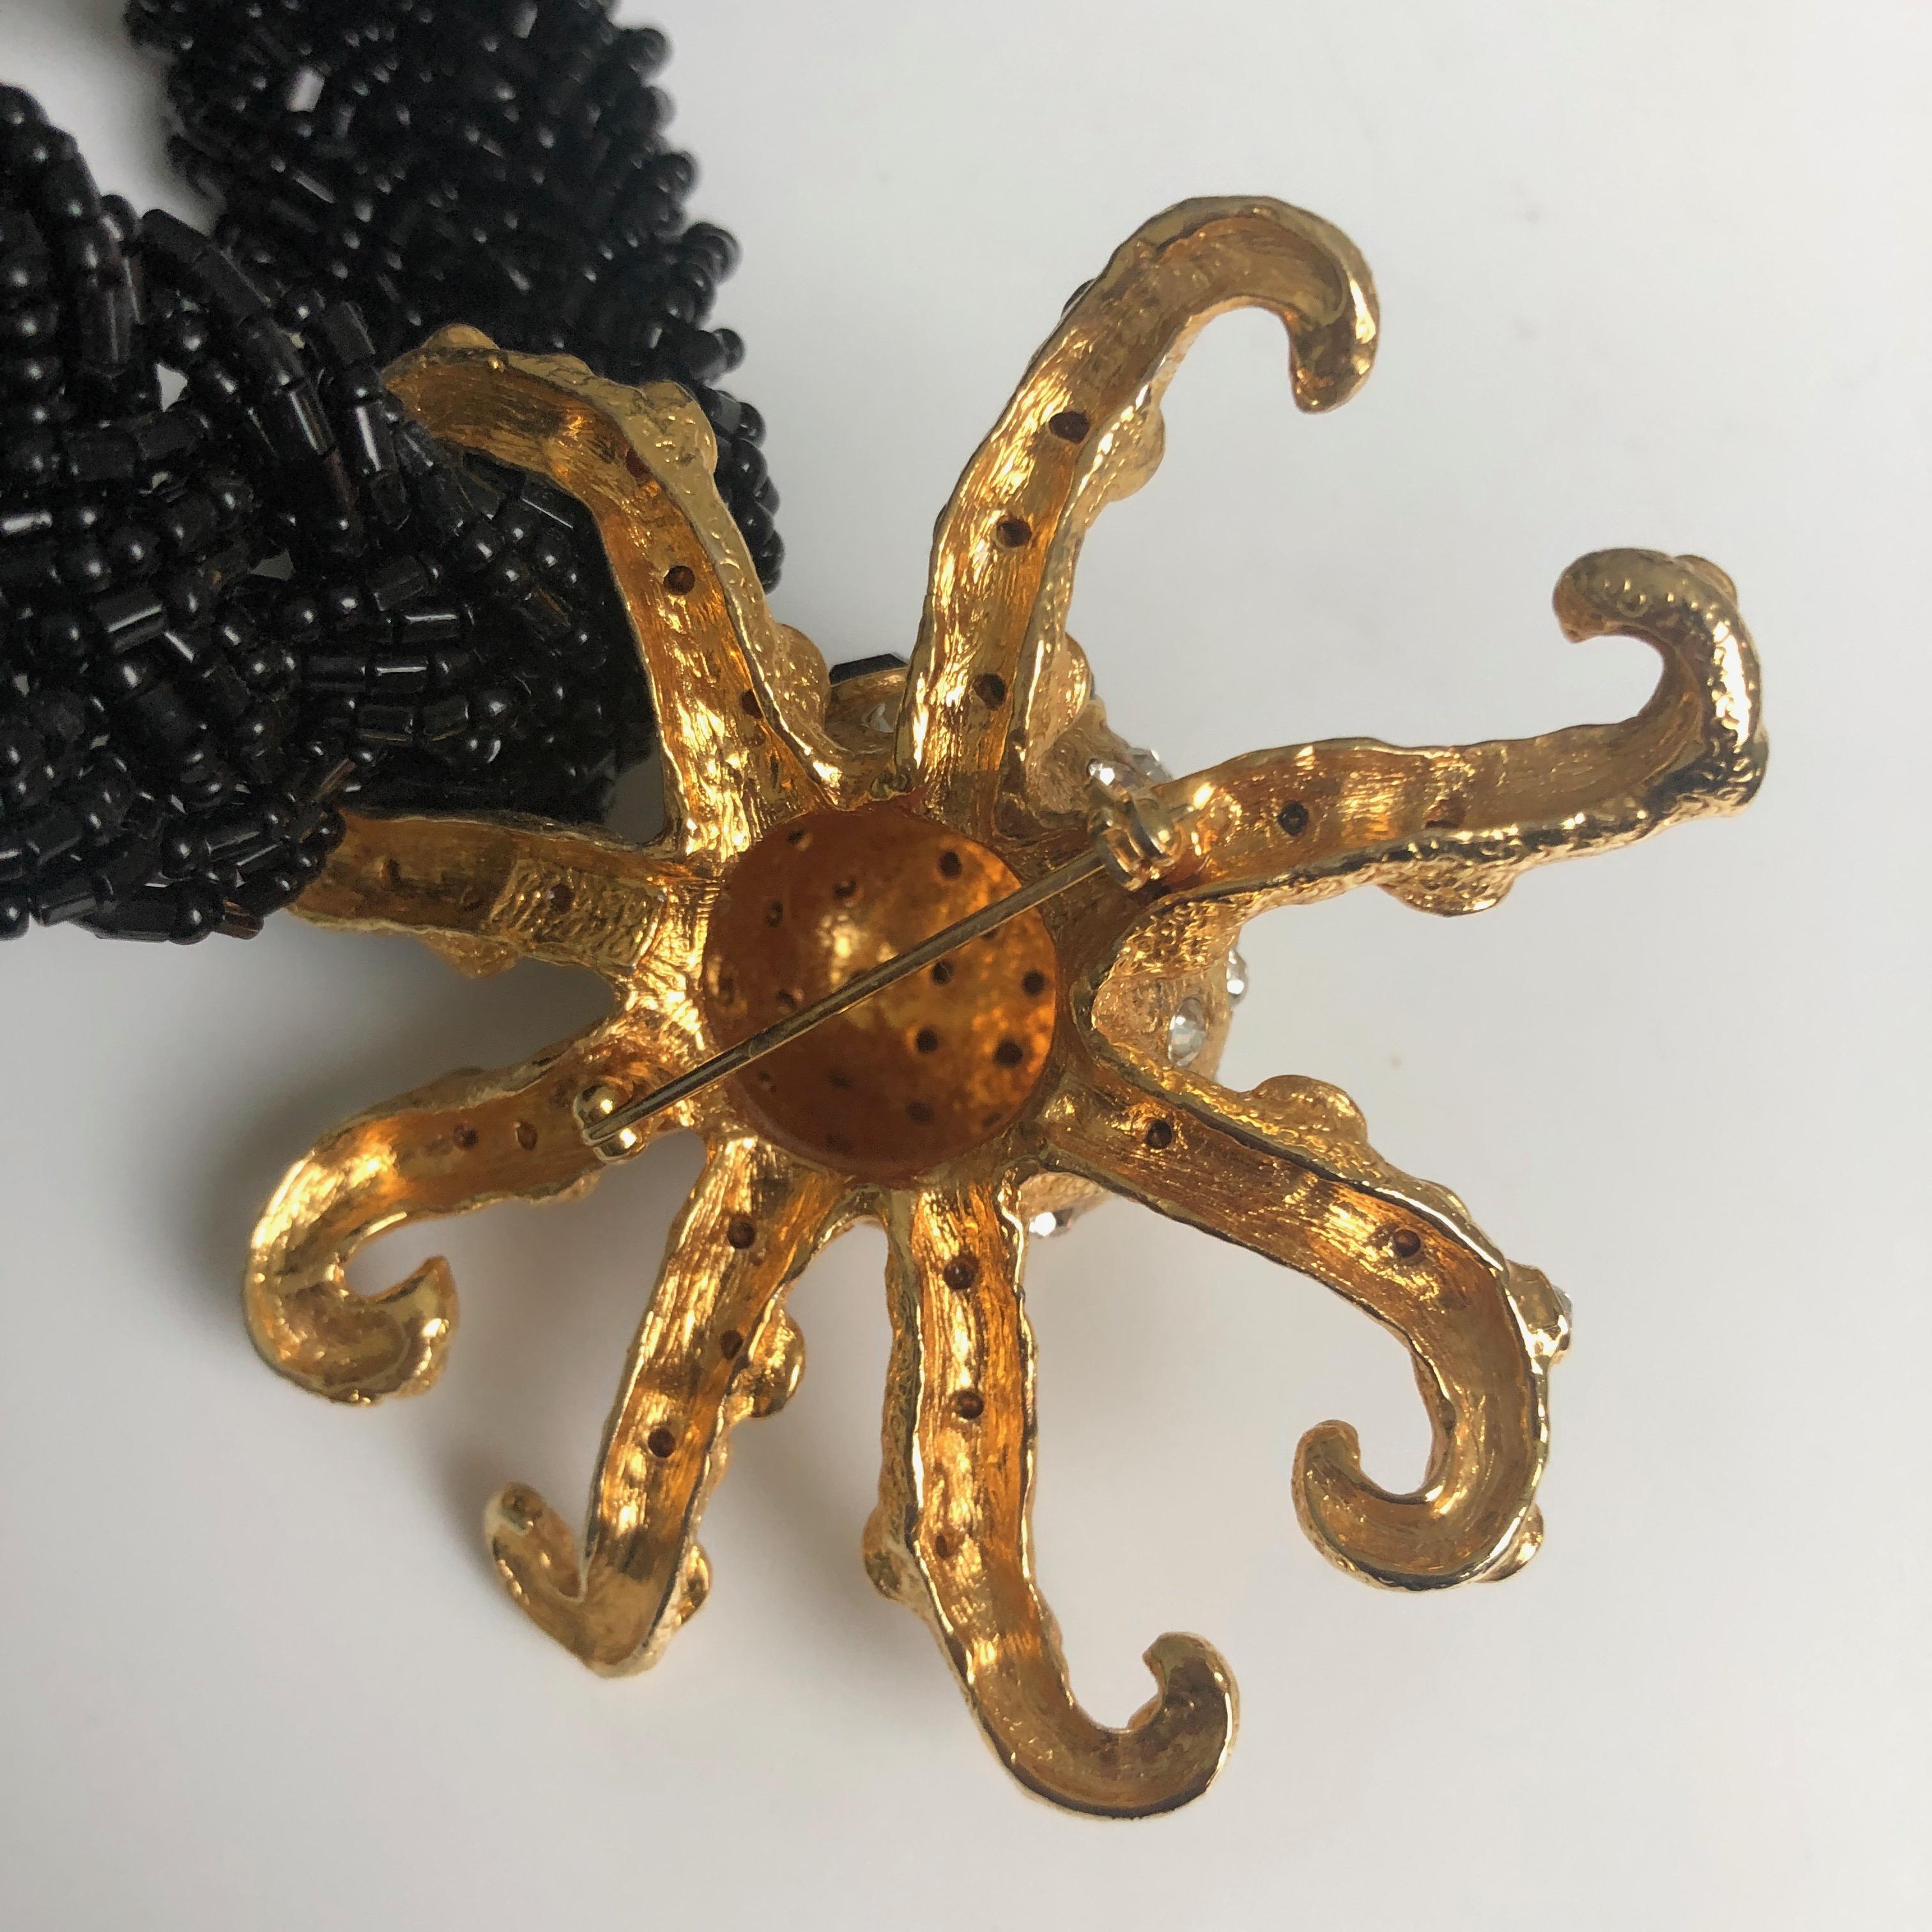 Embellished Octopus Necklace by Stephanie Lake Design Rare Statement Piece For Sale 7